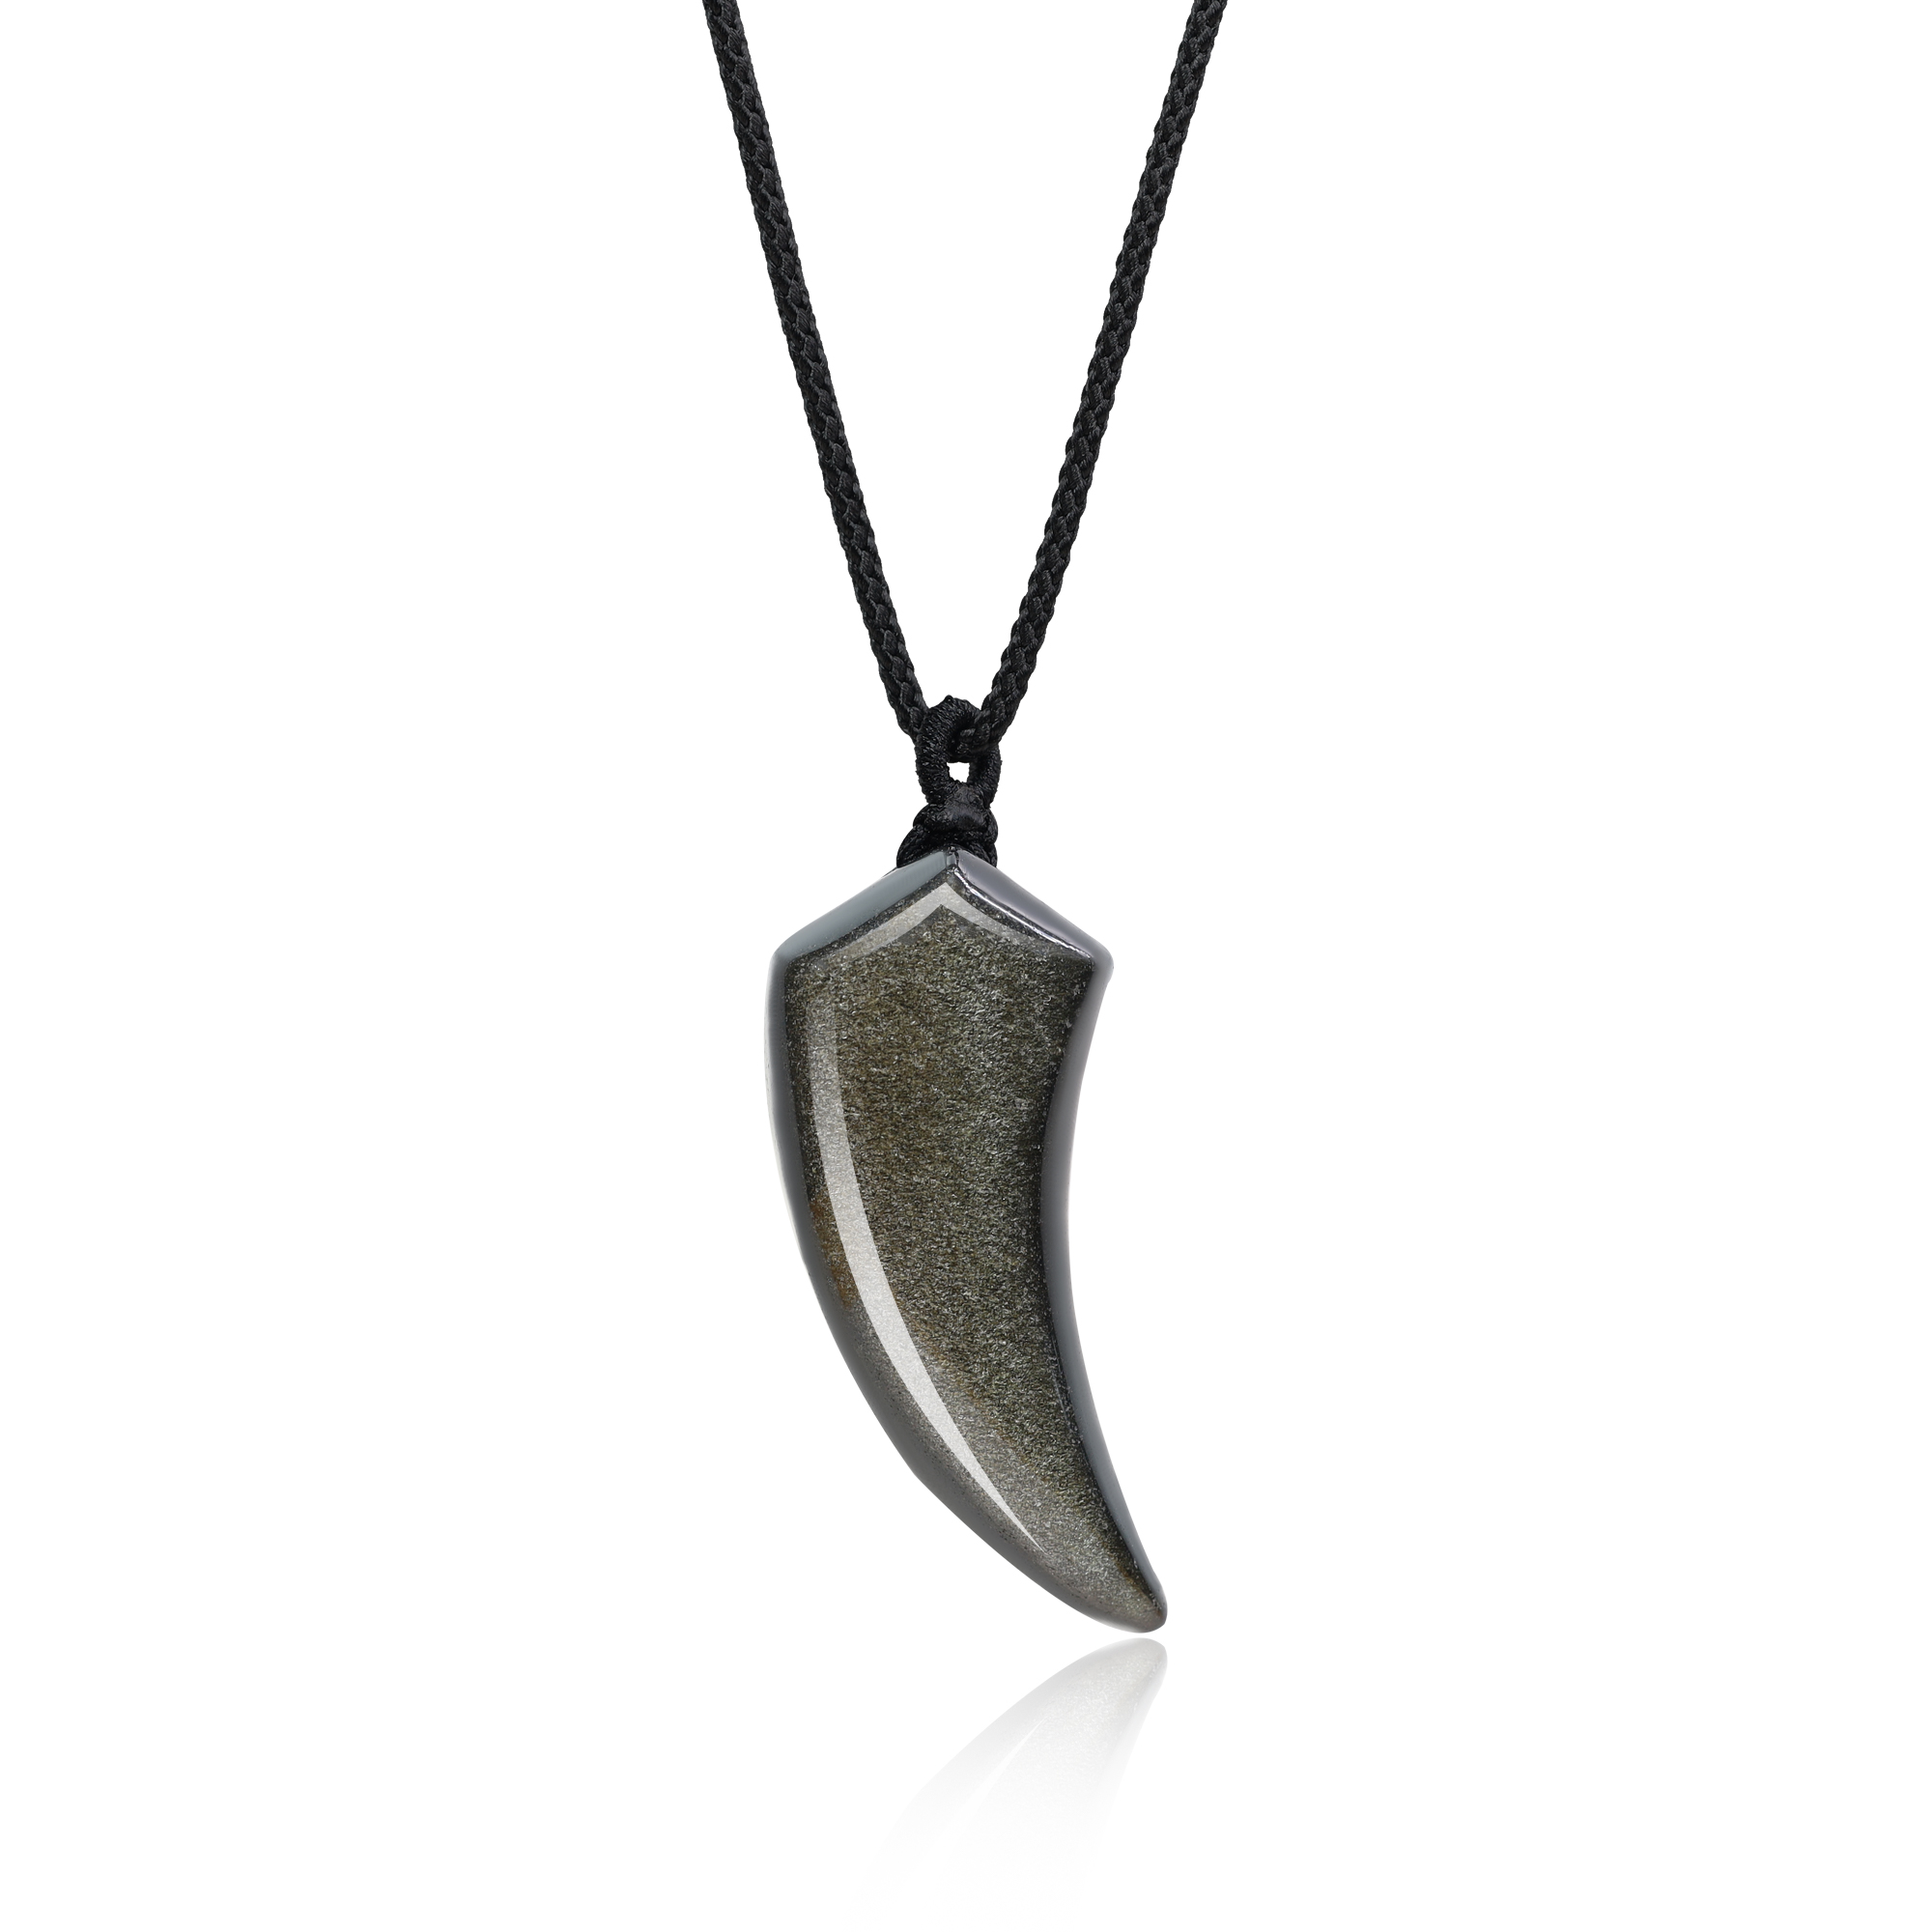 SON Necklace, Wolf Fang Necklace, Wolf Tooth Necklace, Son Gift, Christmas  Gift | eBay